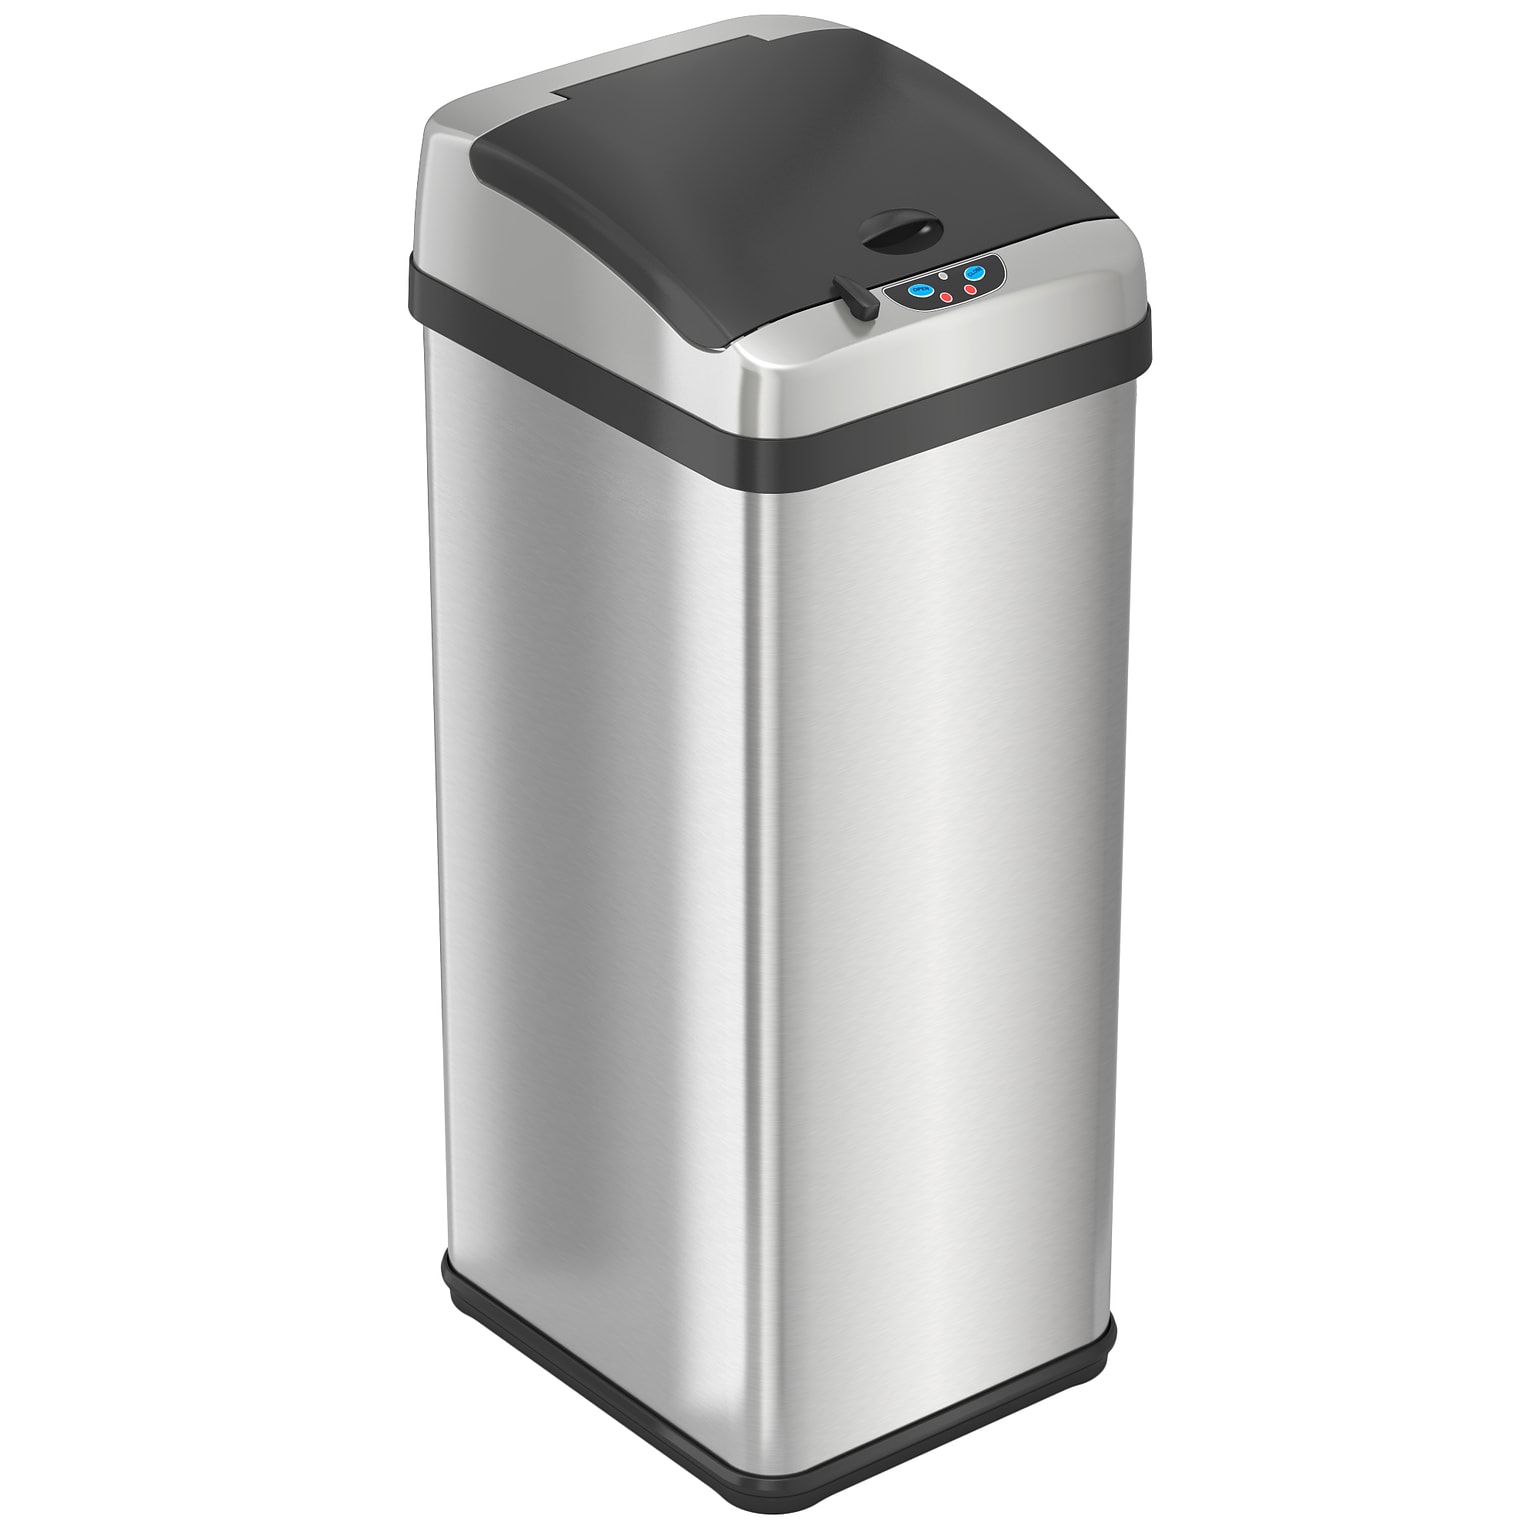 halo Stainless Steel Rectangular Extra-Wide Sensor Trash Can with AbsorbX Odor Control System, 13 Gal., Silver (SC13RX)